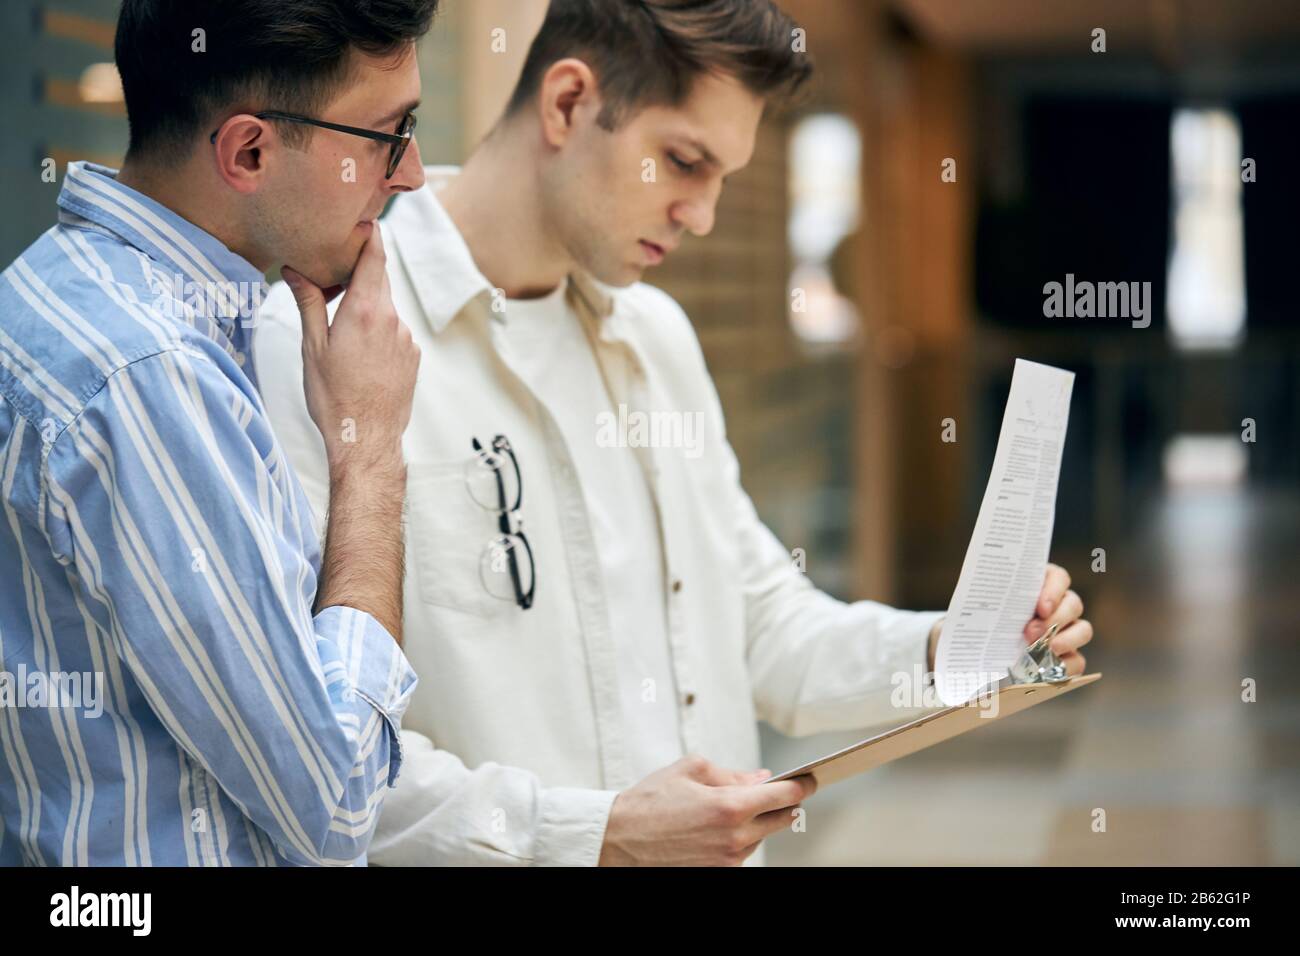 Portrait of two clever businessmen brainstorming in the office. close up side view photo. job, profession, occupation Stock Photo